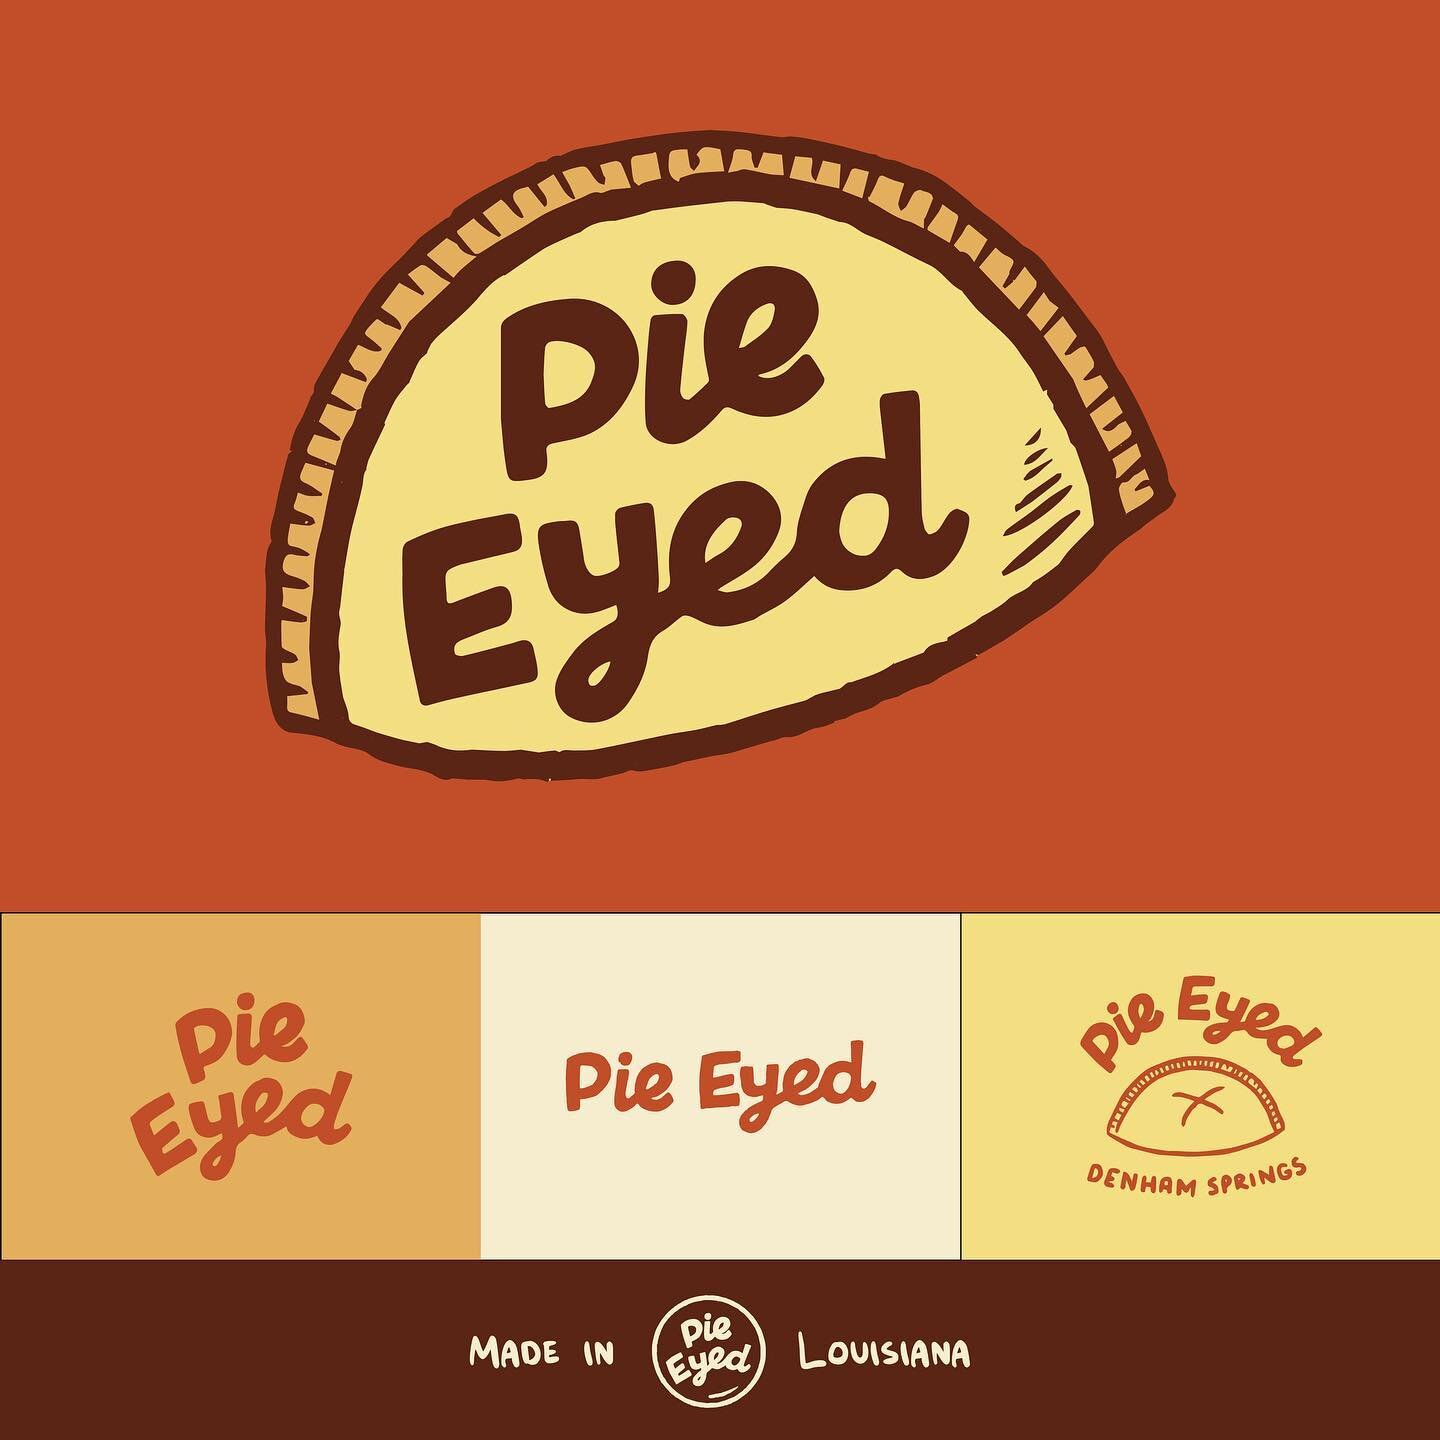 The other pie eyed concept that did not get chosen, but is still loved! 🥧🧡